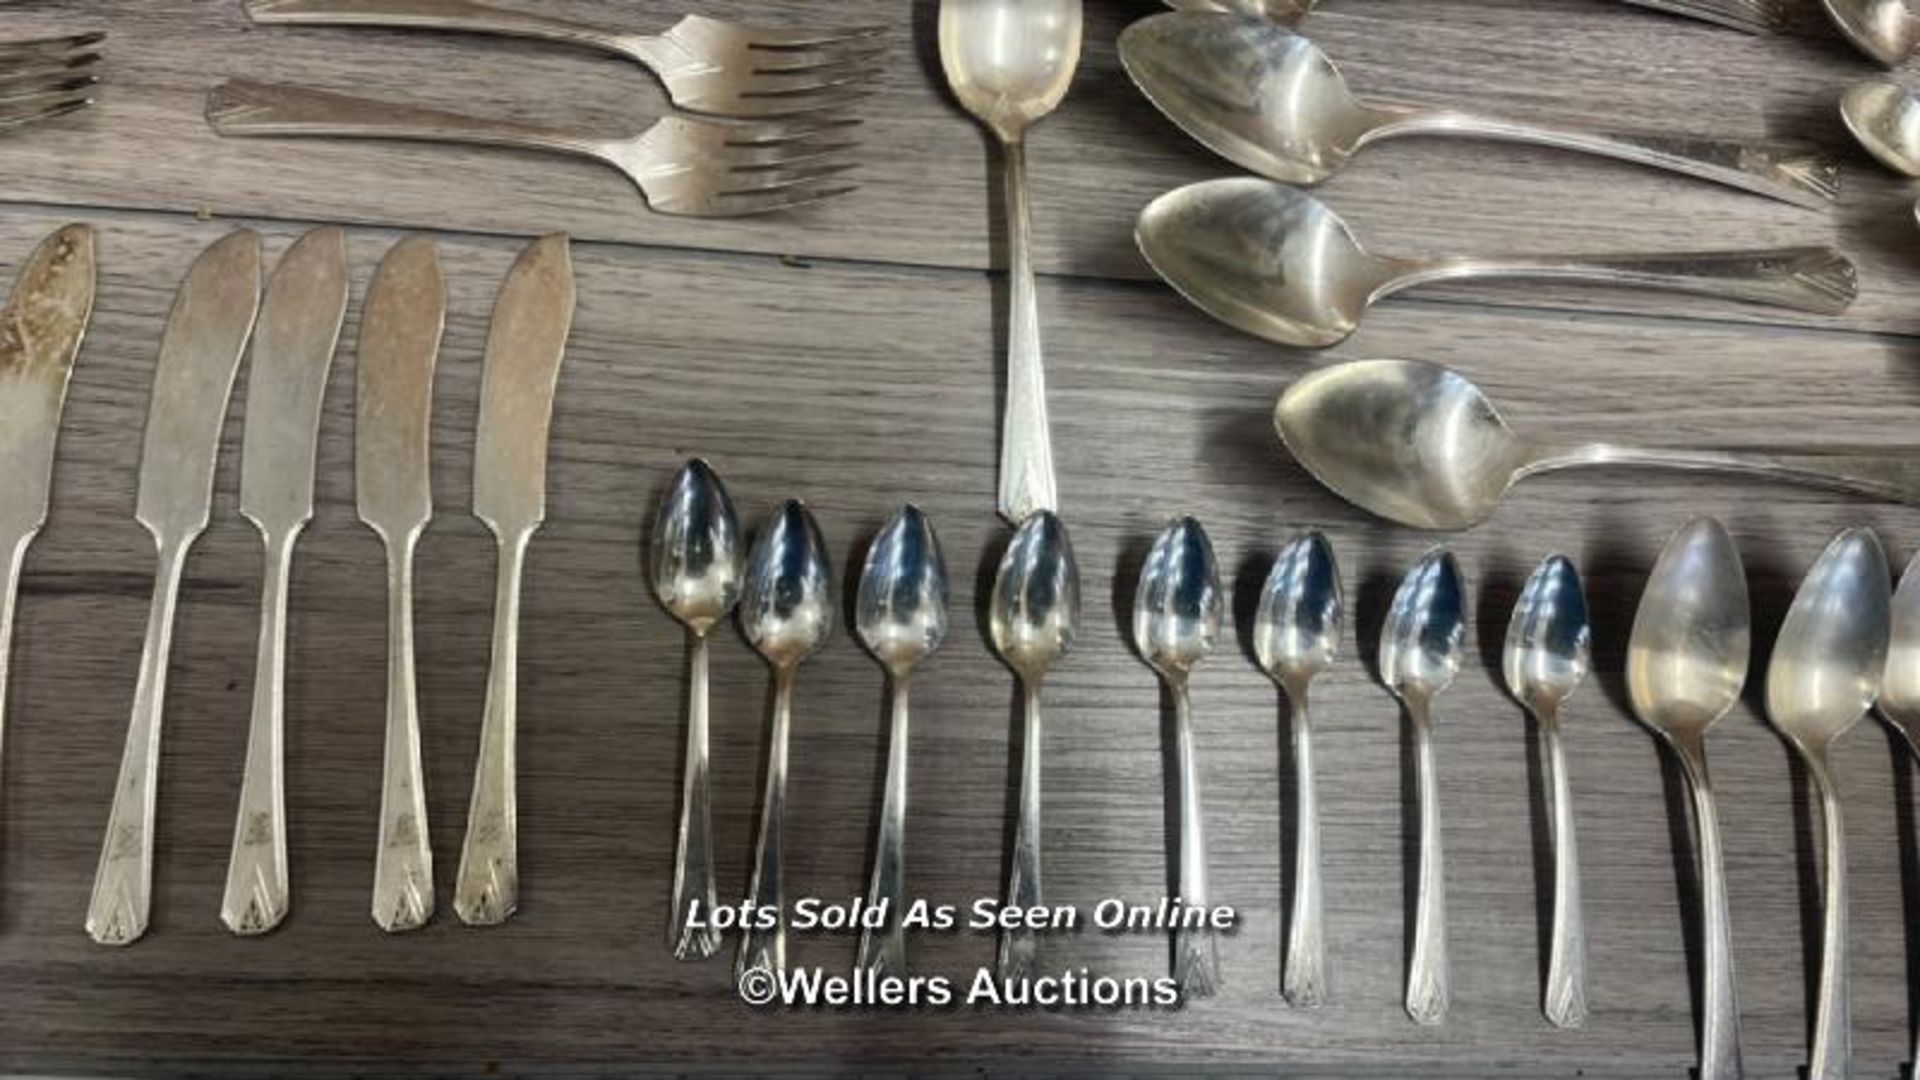 A LARGE COLLECTION OF COMMUNITY PLATE CUTLERY, COFFEE POT, MILK JUG, SUGAR BOWL AND SUGAR NIPS - Image 8 of 16